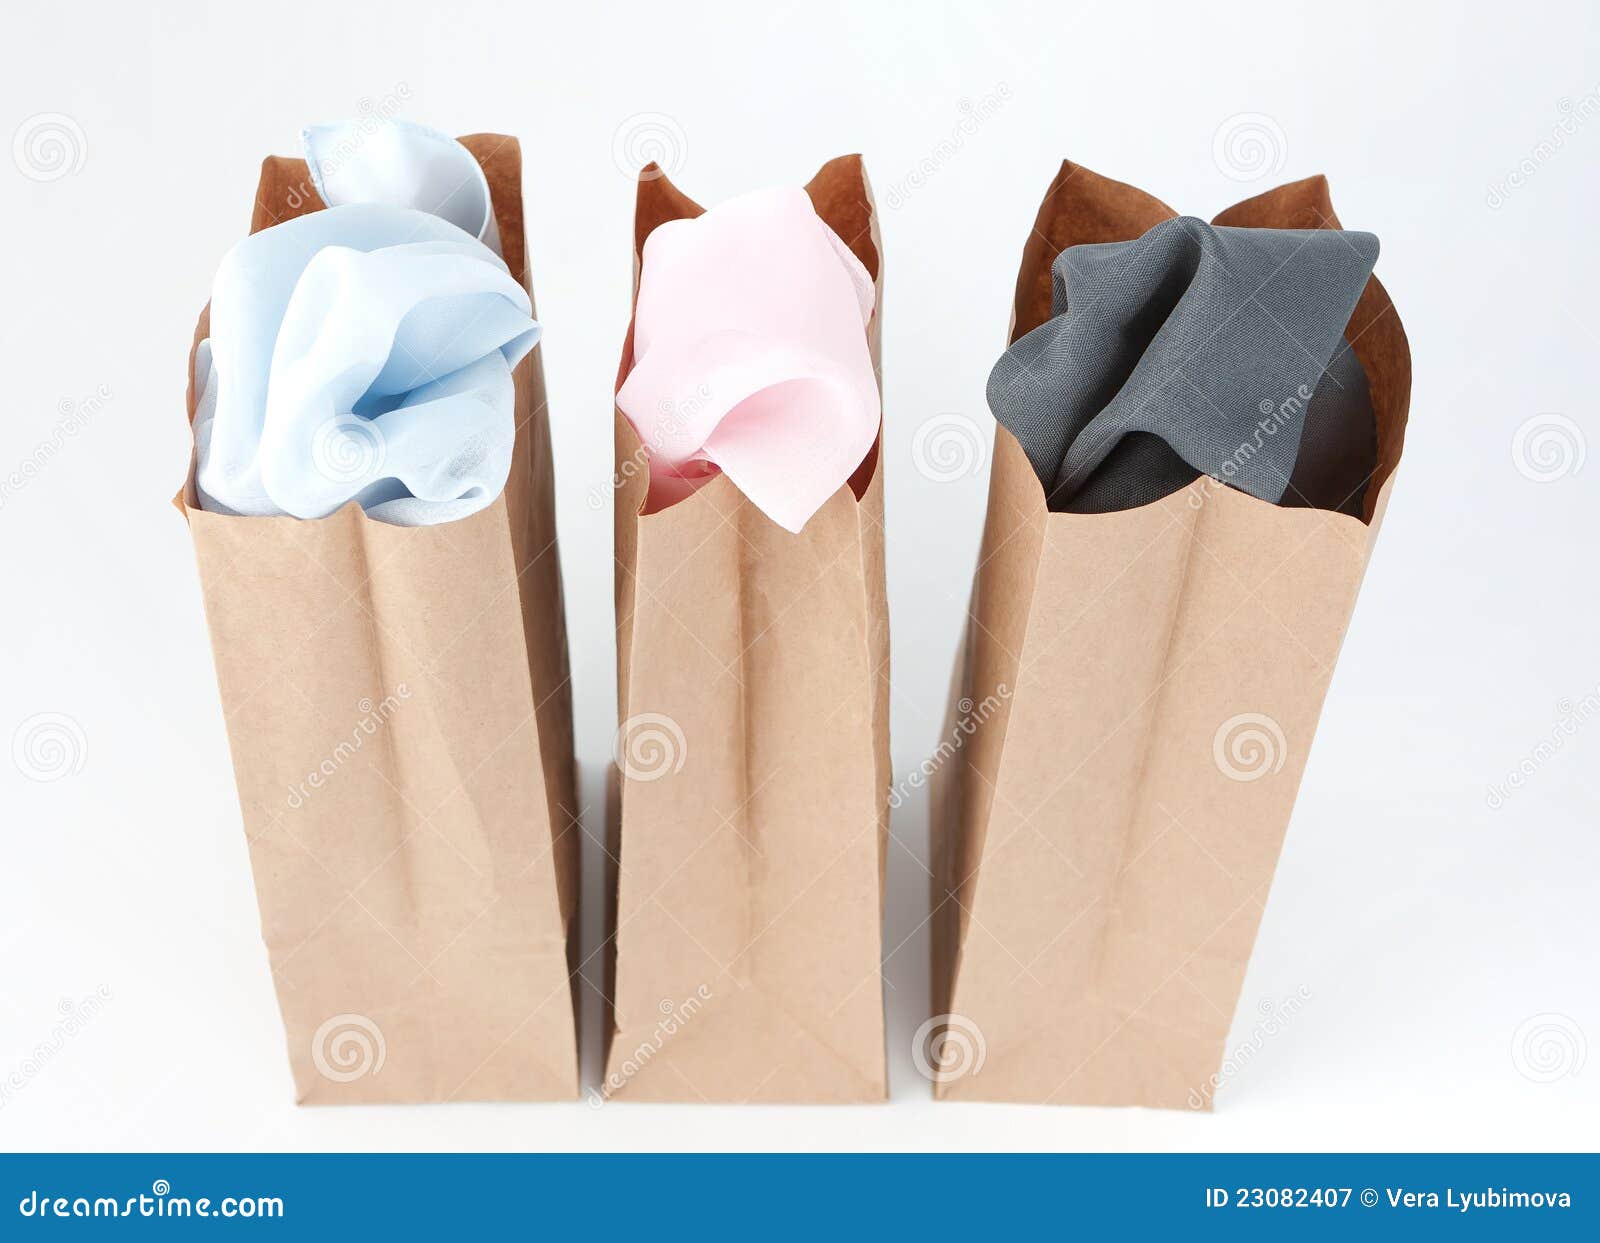 Clothes in Brown Paper Bags Stock Image - Image of friendly, supplies ...